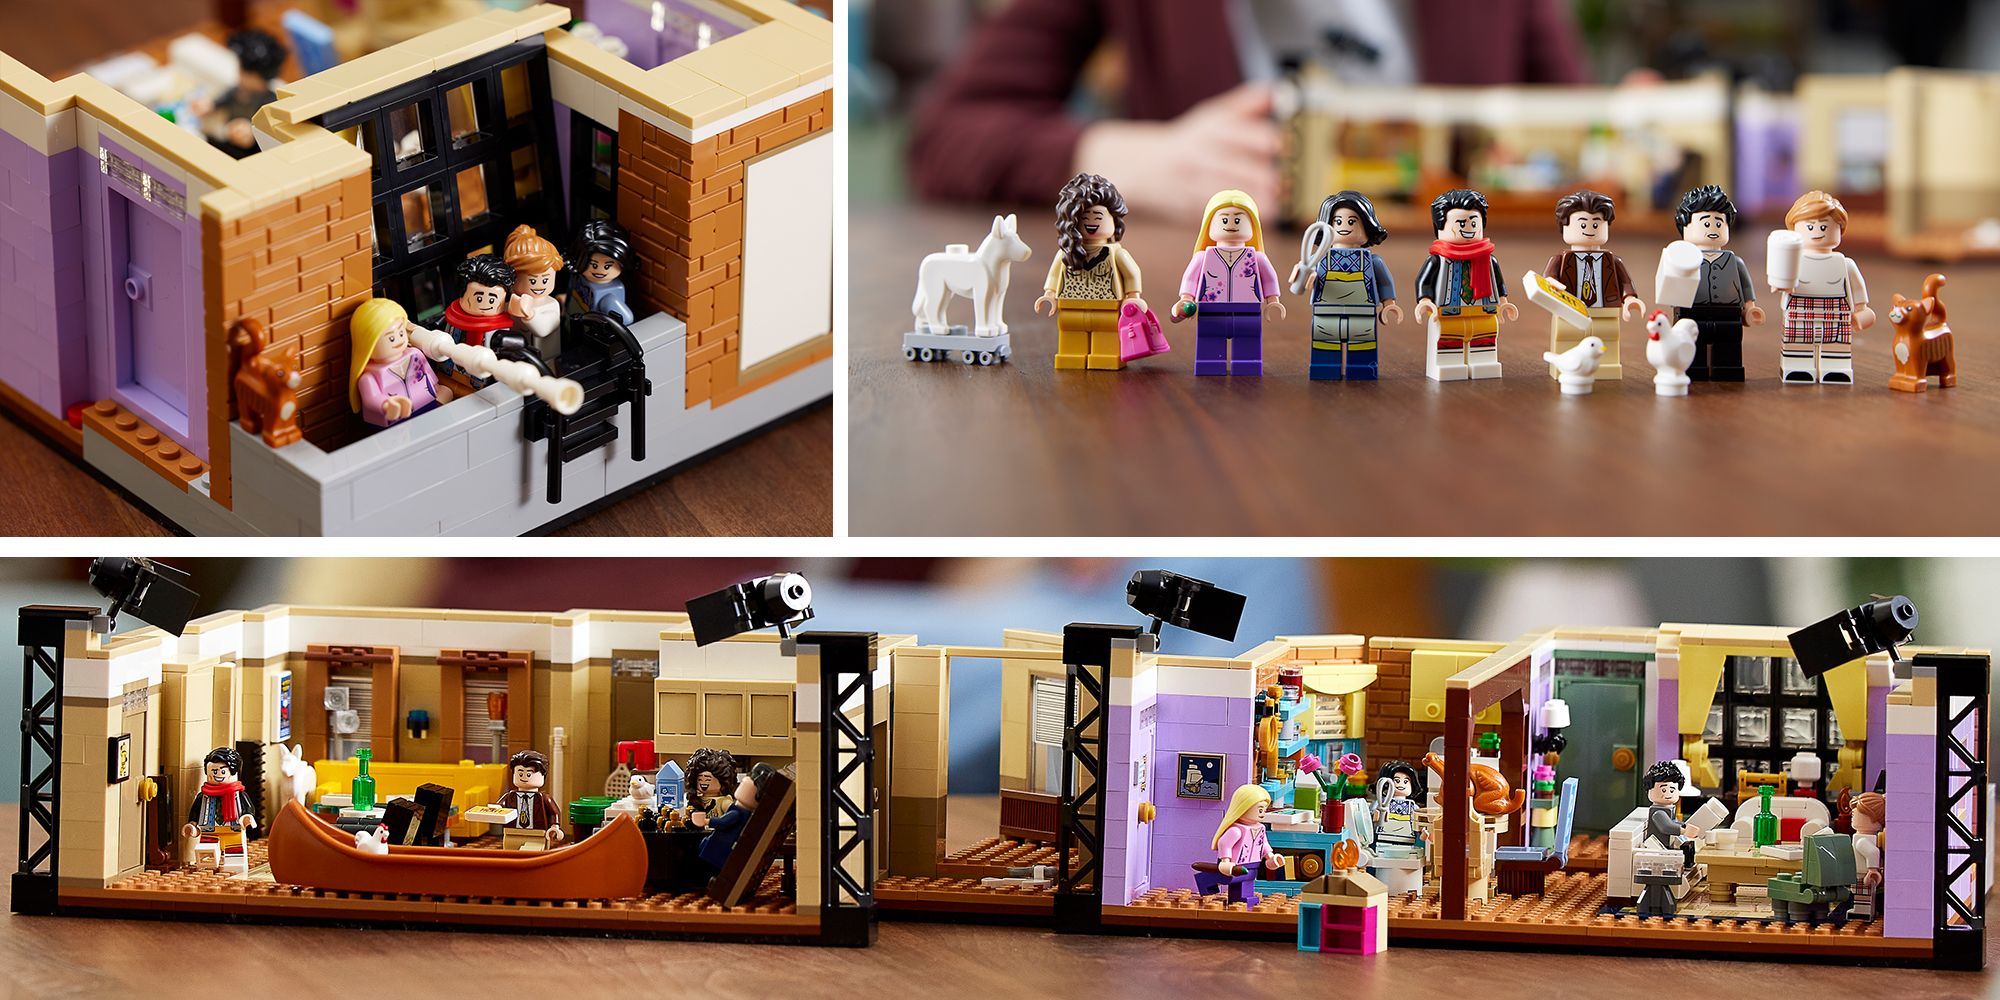 angreb Kunstig Mirakuløs The iconic F.R.I.E.N.D.S apartments have been recreated in a 2,048 piece  Lego set